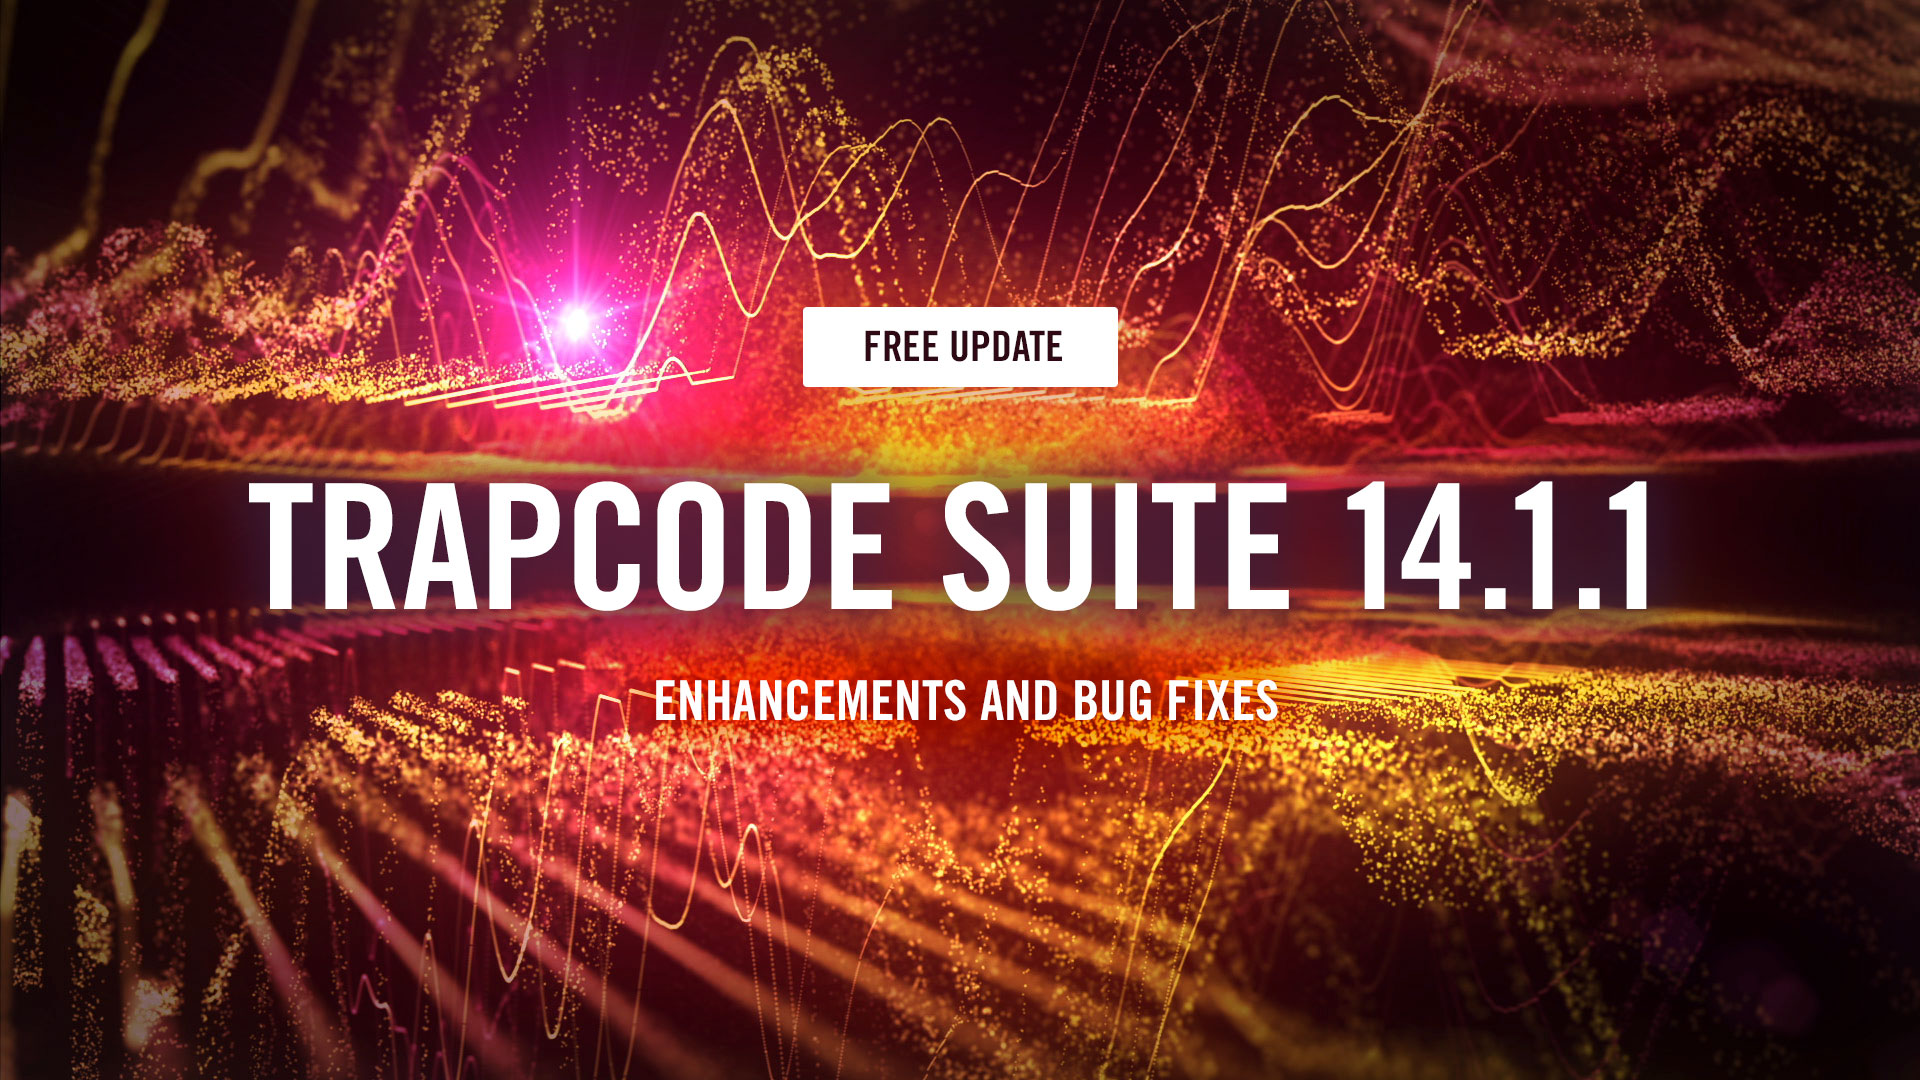 red giant trapcode suite crack